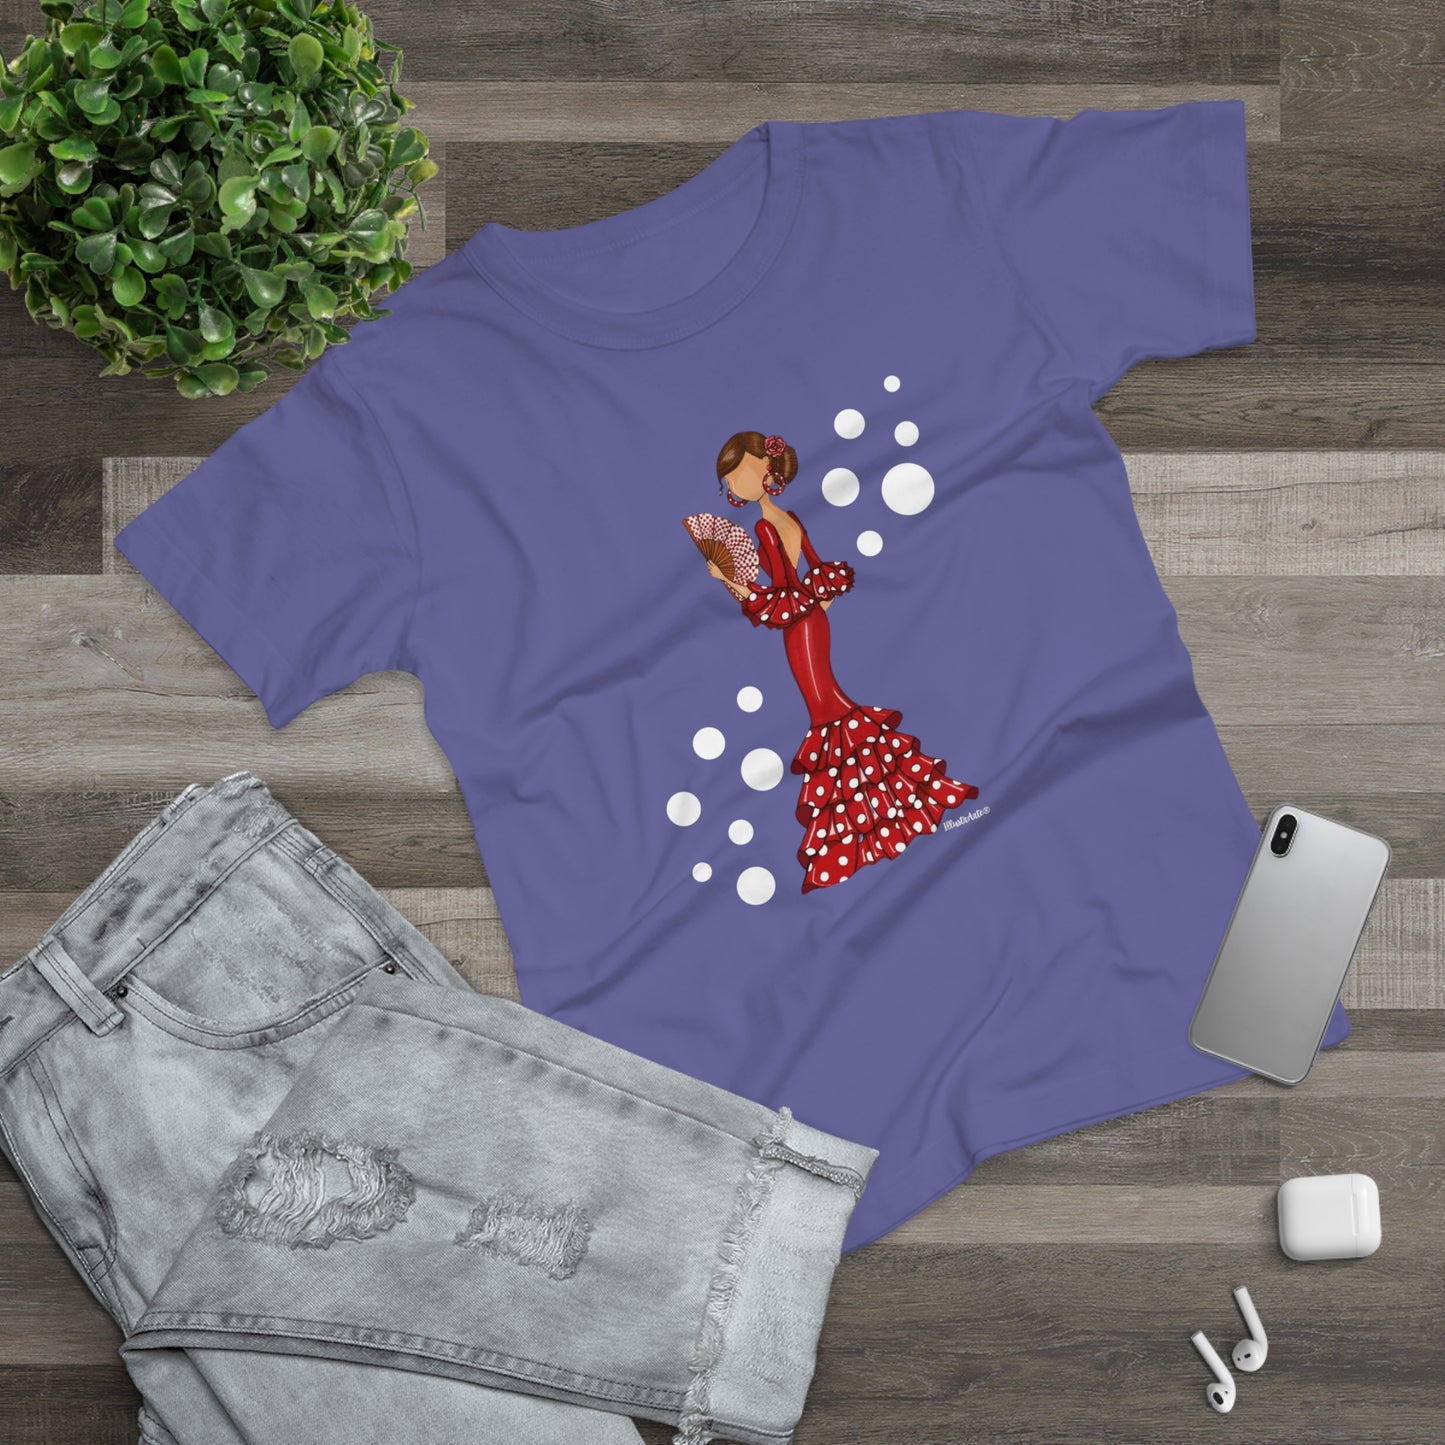 a t - shirt with a picture of a woman in a polka dot dress